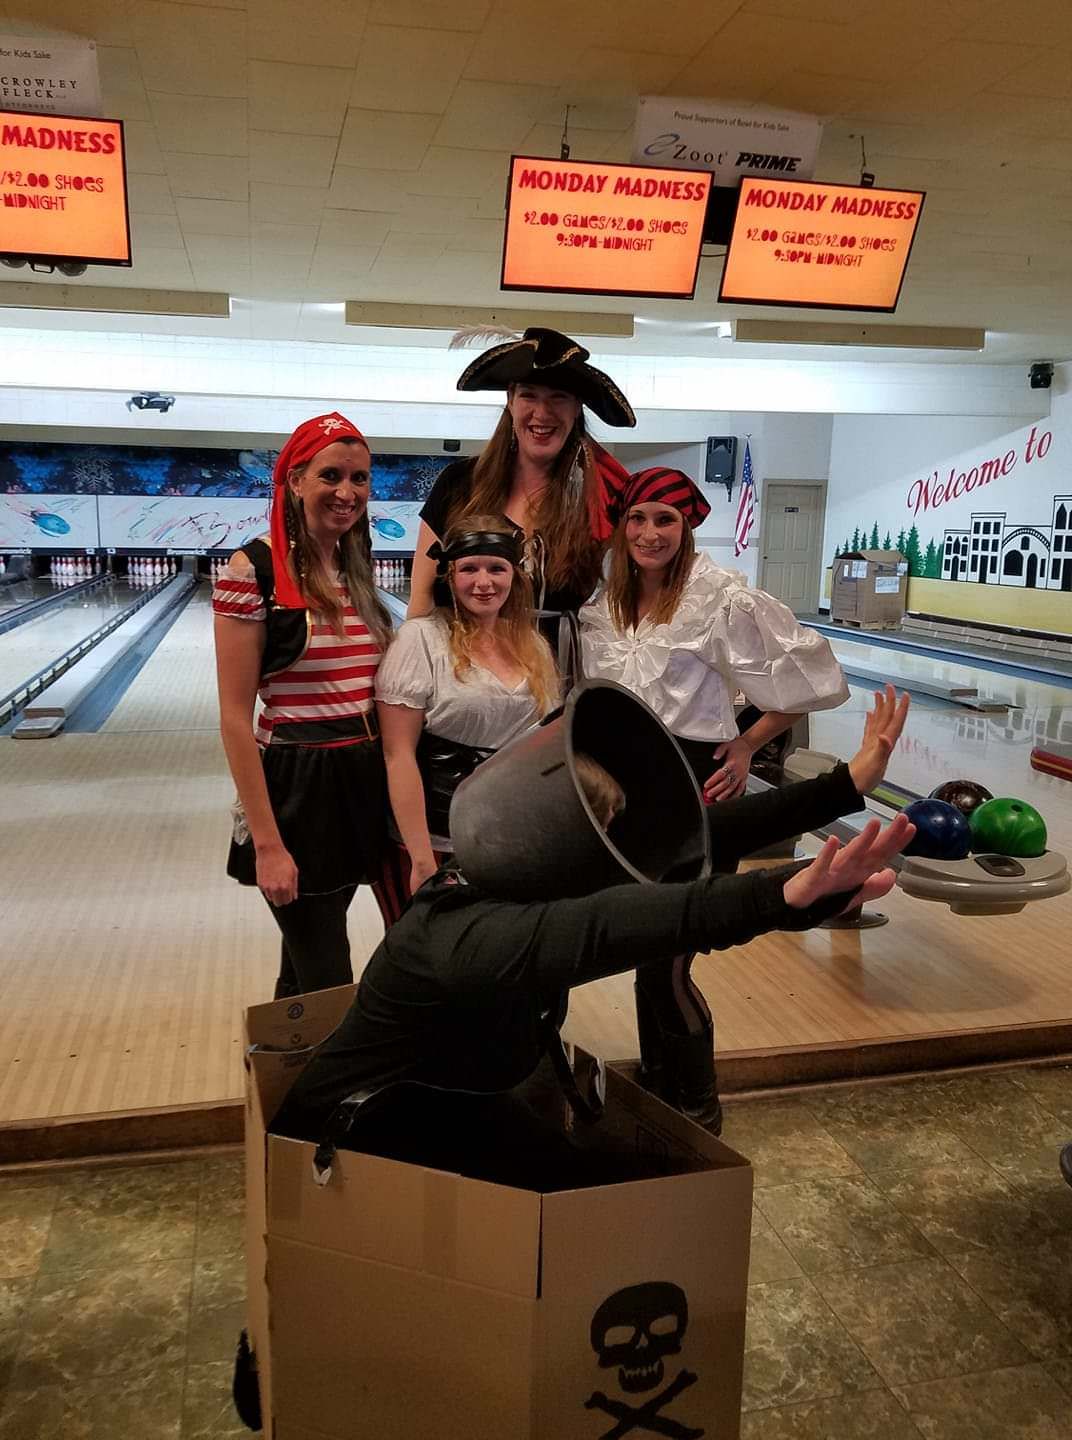 My wife went to a pirate themed charity bowling event but decided last minute she didn't want to dress like a pirate since she figured everyone else would be. So she went as a cannon.